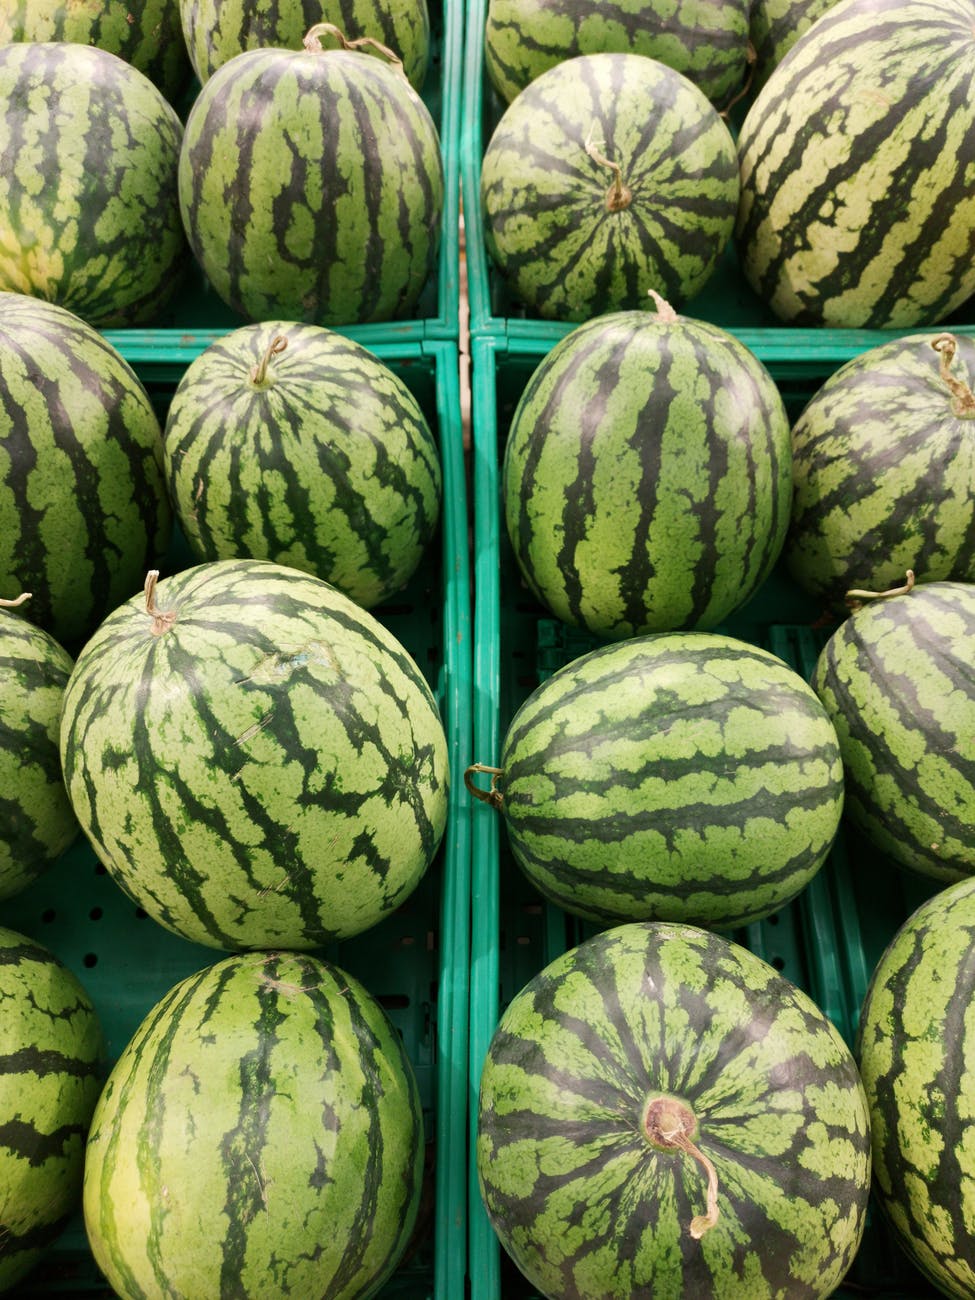 Featured image for “Fertilizer Applications Need to Continue During Watermelon Harvests”